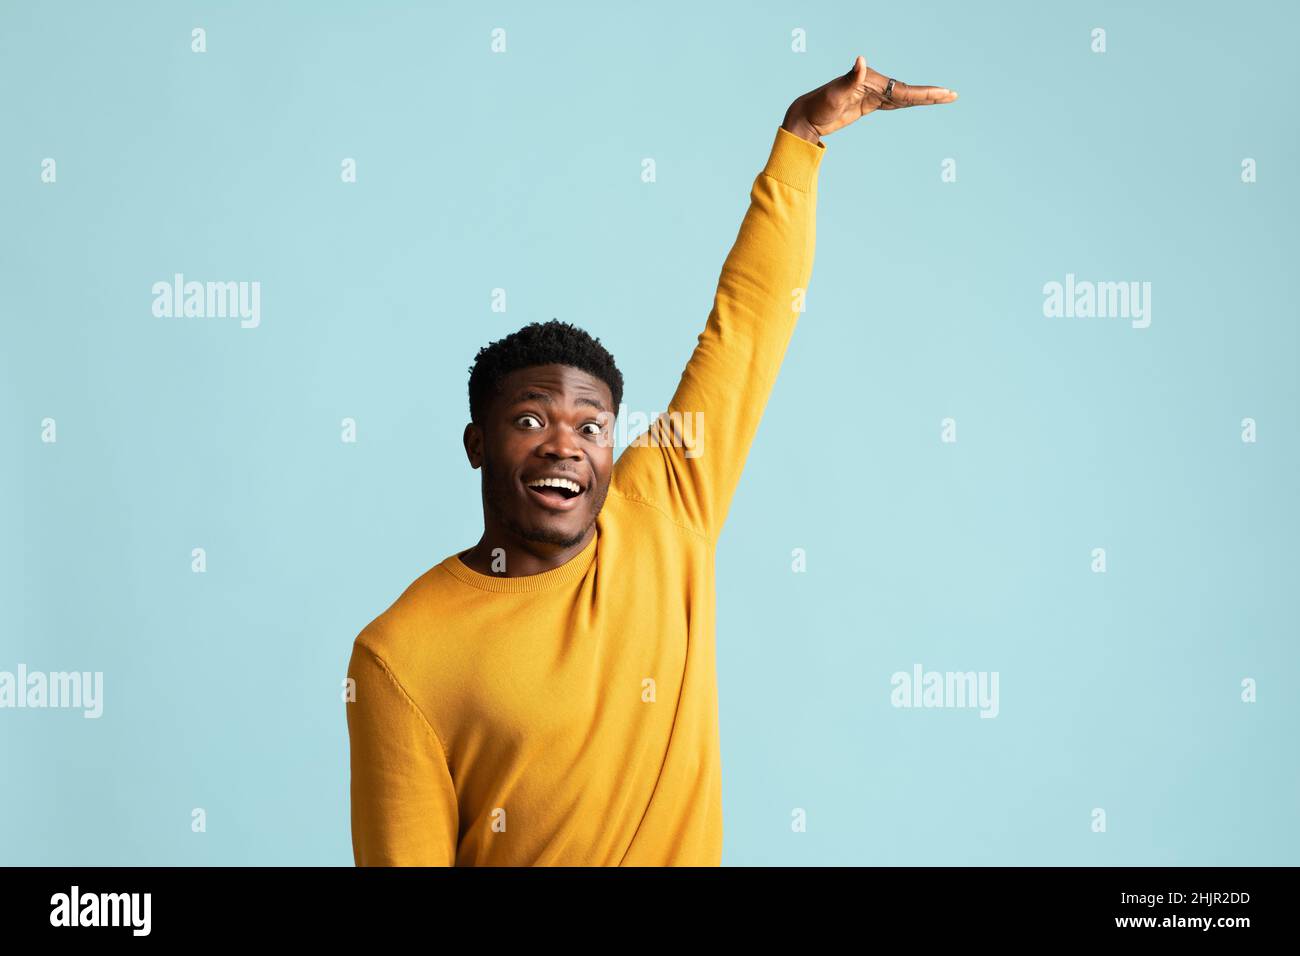 Excited black guy showing height of something Stock Photo